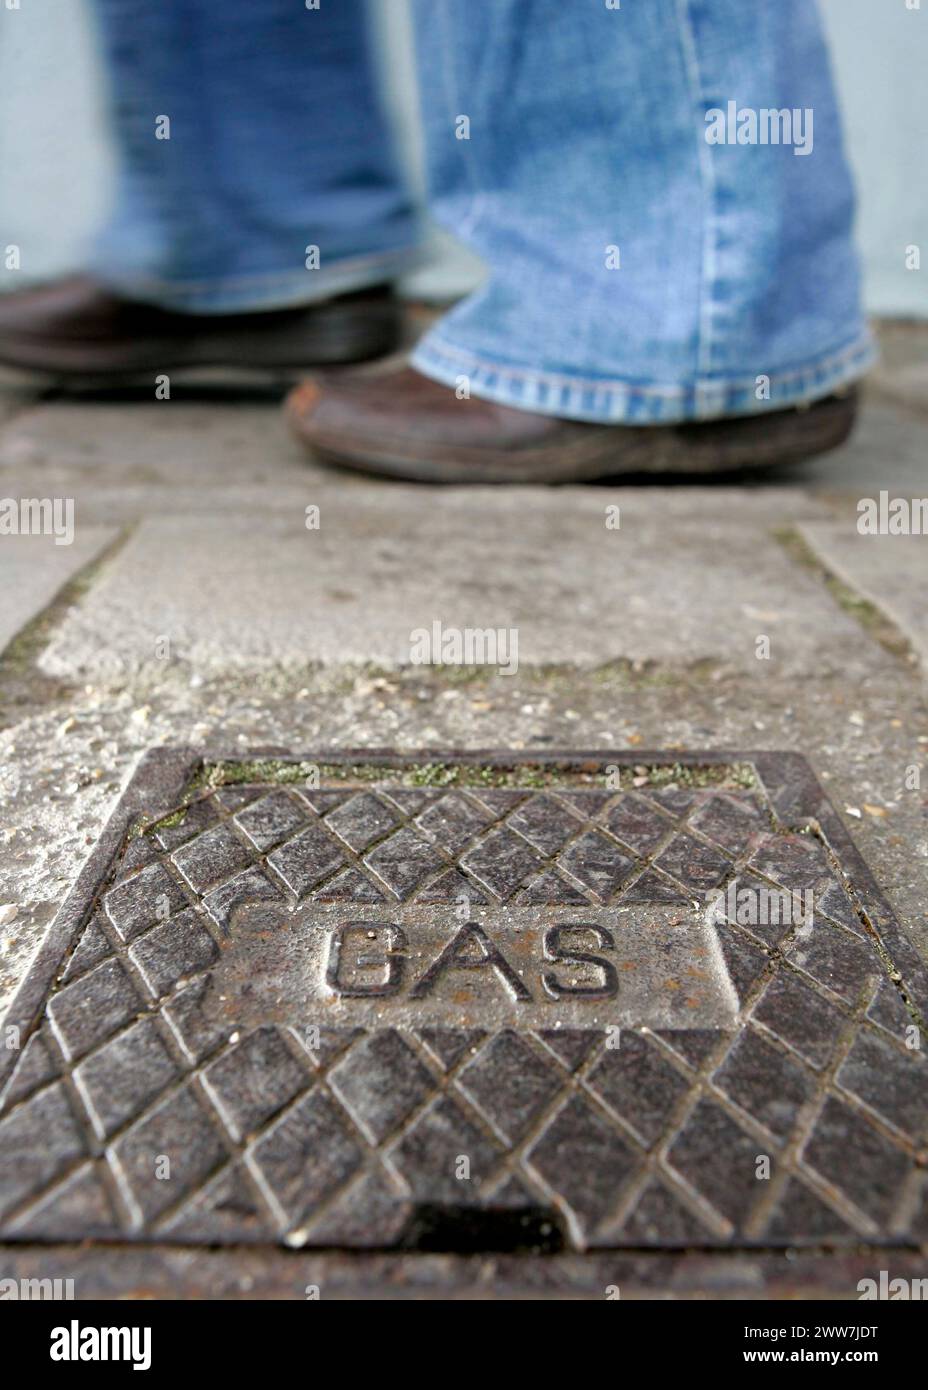 27/07/11. FILE PHOTO..British Gas has been fined £2.5m by the energy regulator Ofgem for failing to handle customer complaints correctly...All Rights Stock Photo